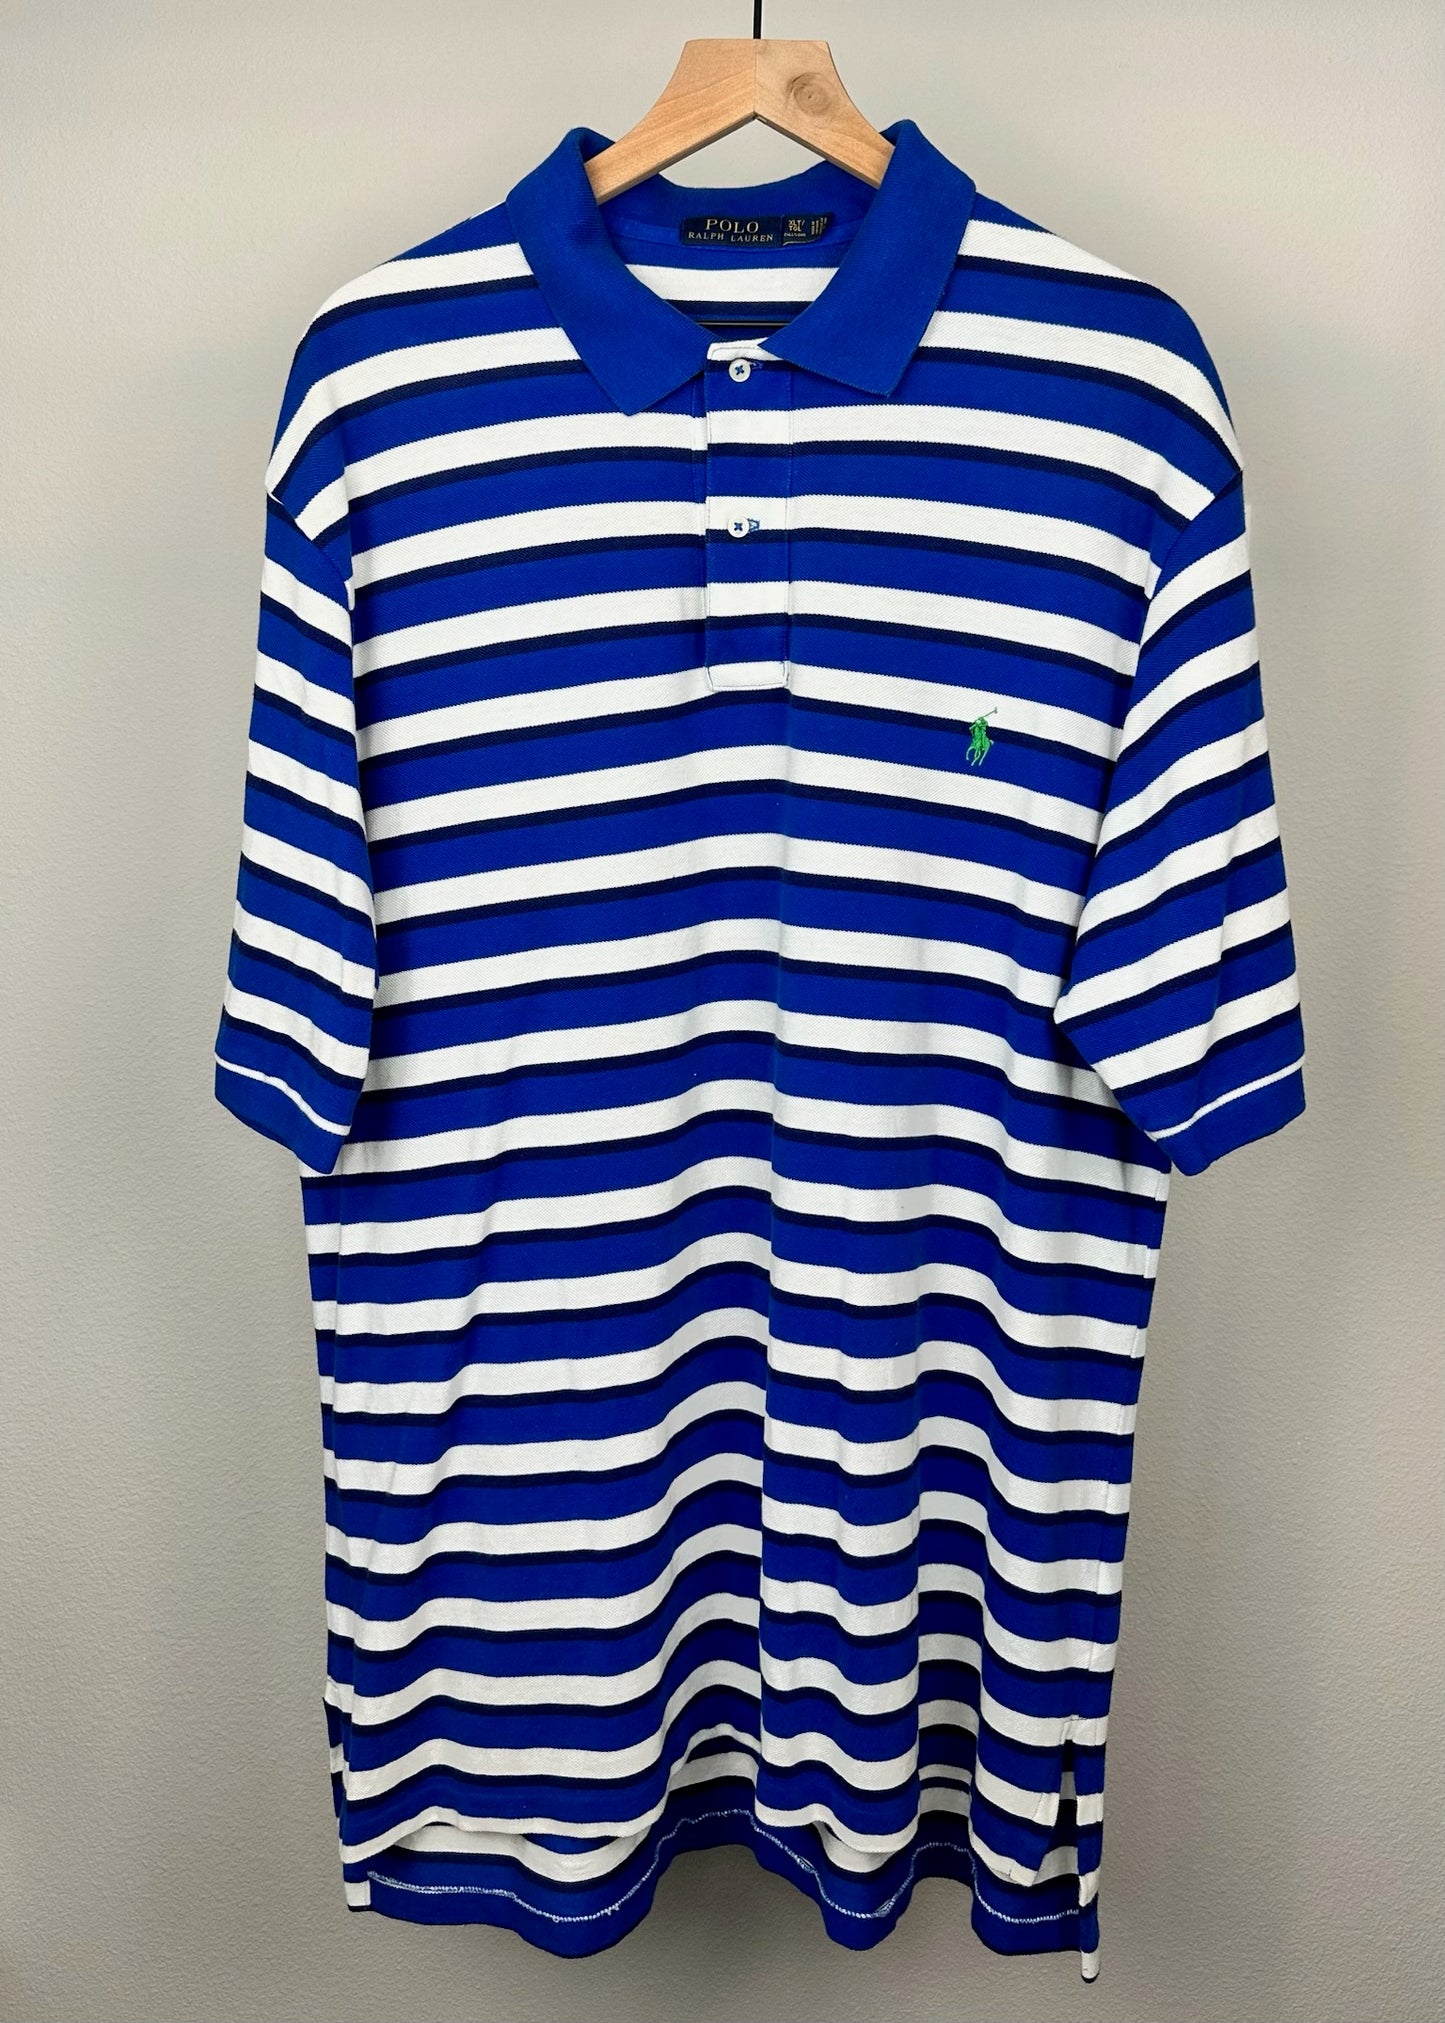 Blue and White Tall Shirt By Polo